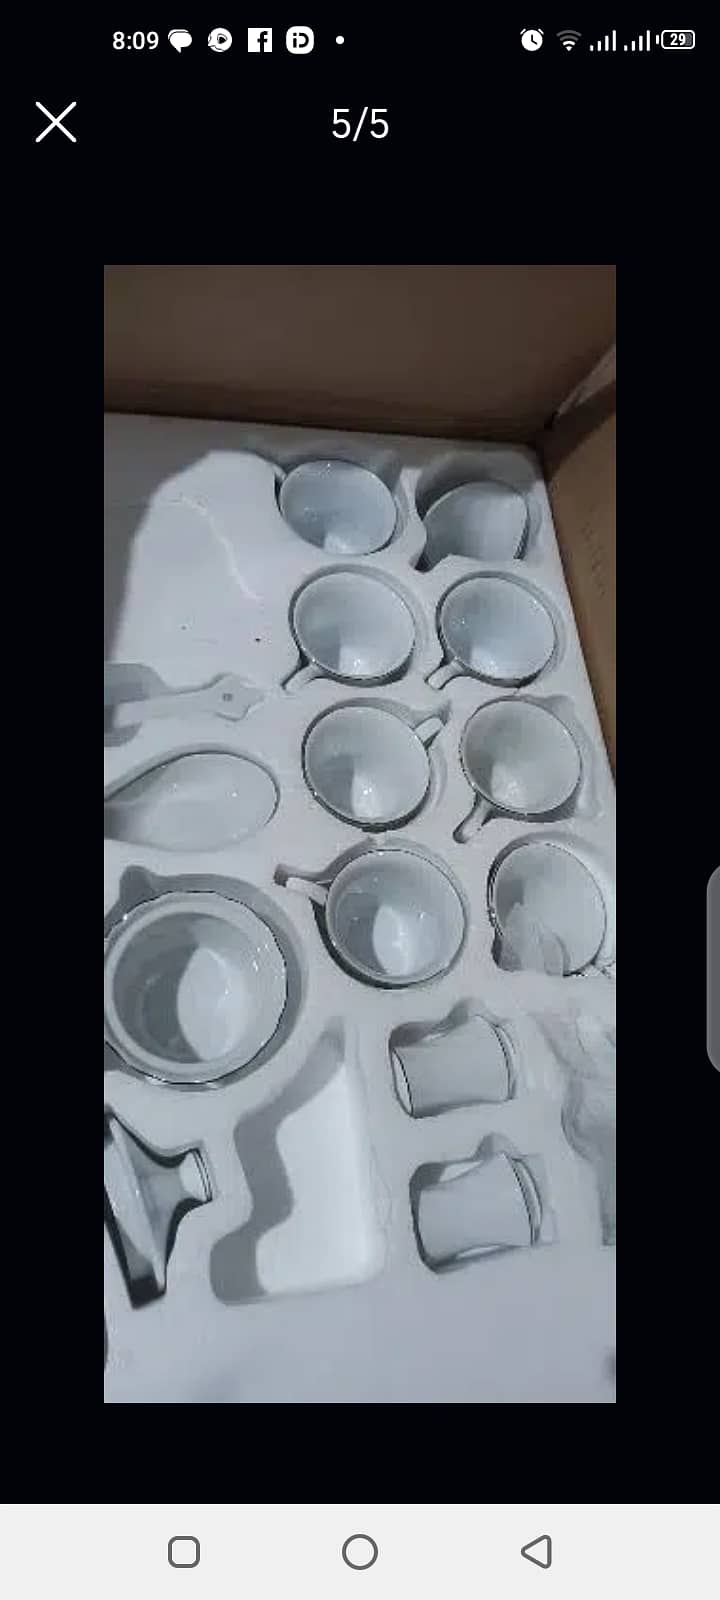 Dinner set (8 persons ) for sale in katachi 5